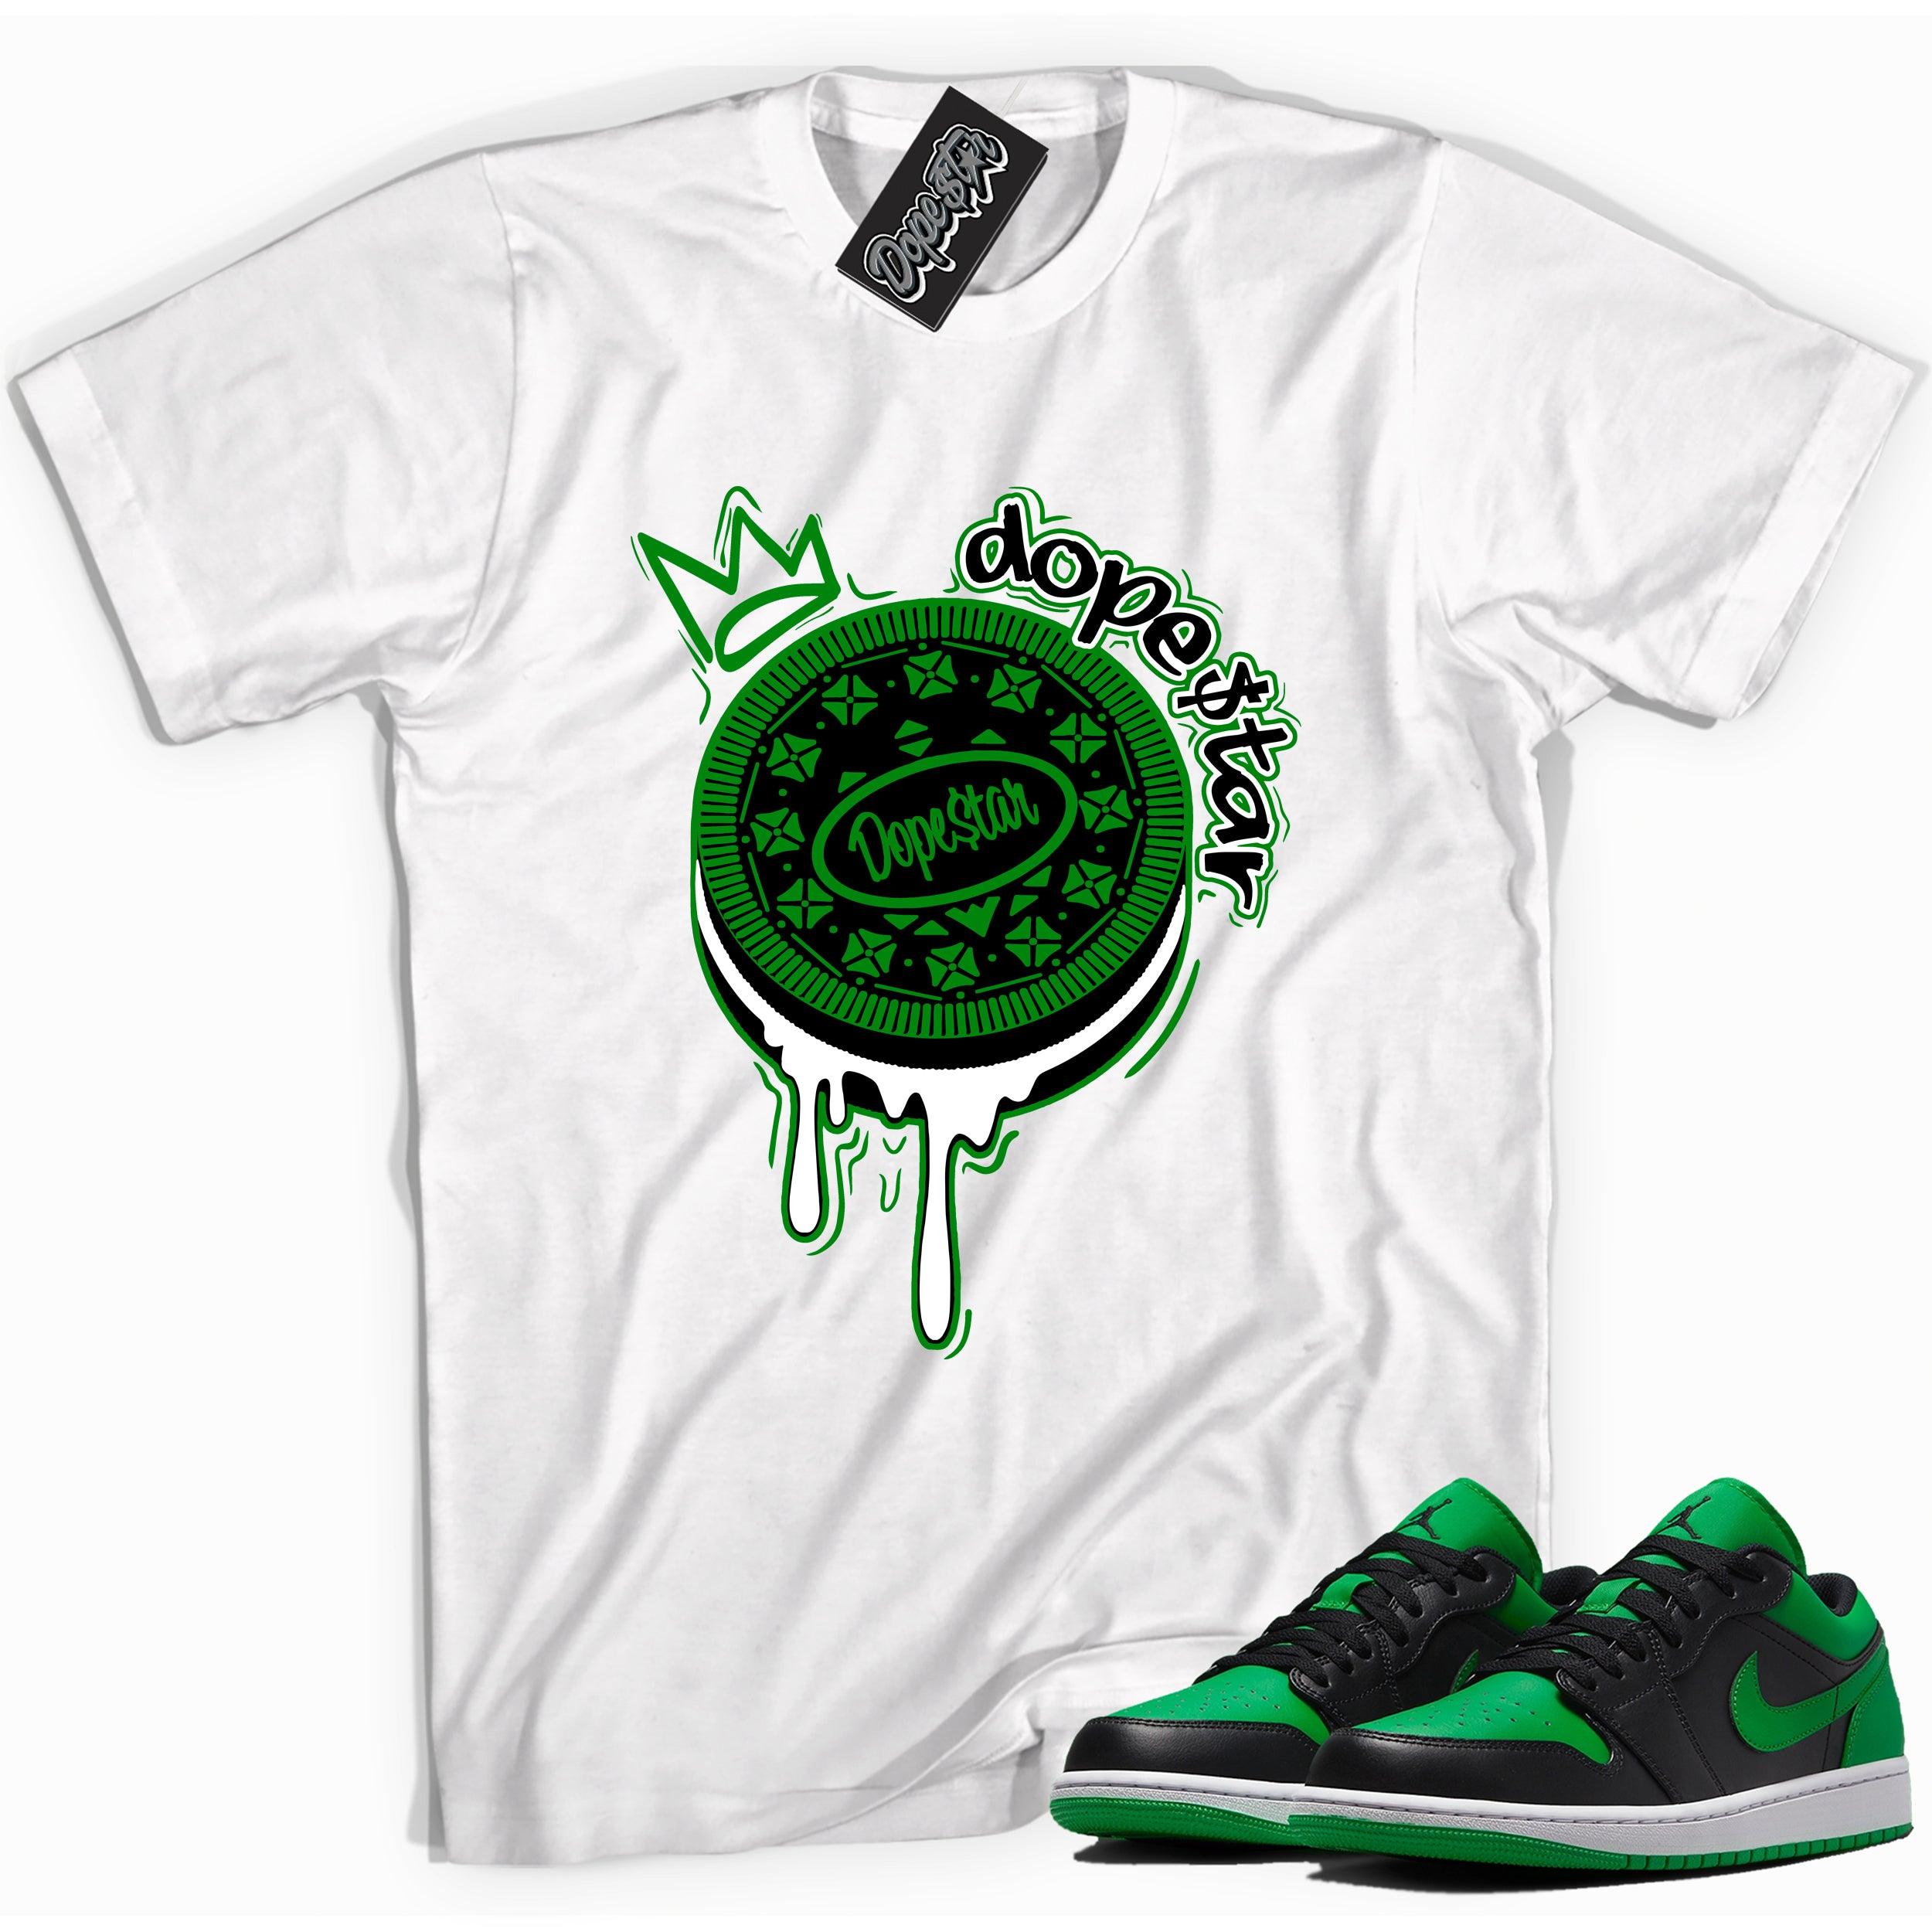 Cool white graphic tee with 'Dope $tar Oreo' print, that perfectly matches Air Jordan 1 Low Lucky Green sneakers